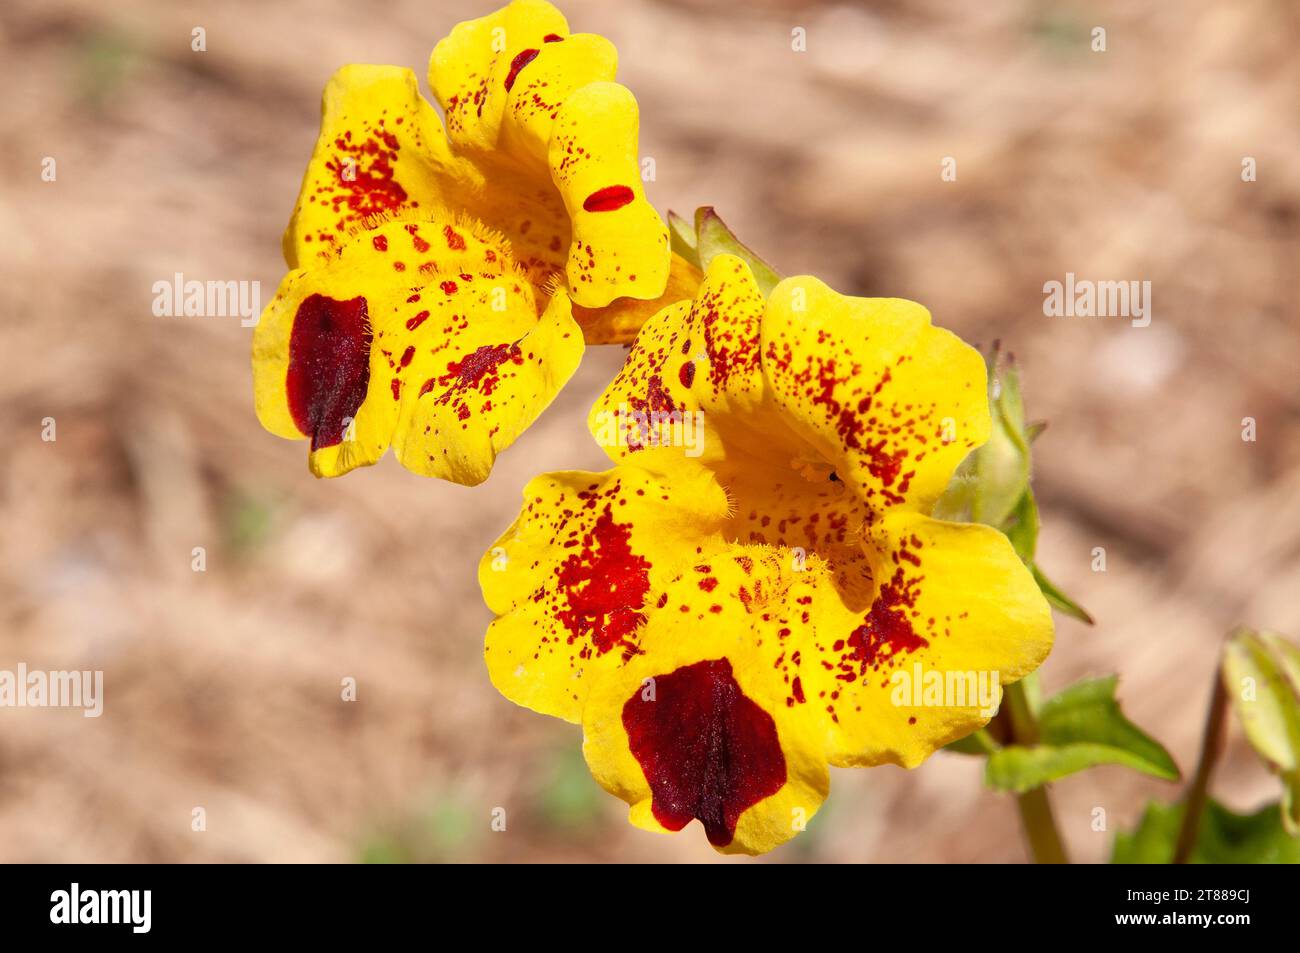 Sydney Australia, yellow flowers with red markings of a mimulus guttatus or monkey flower Stock Photo